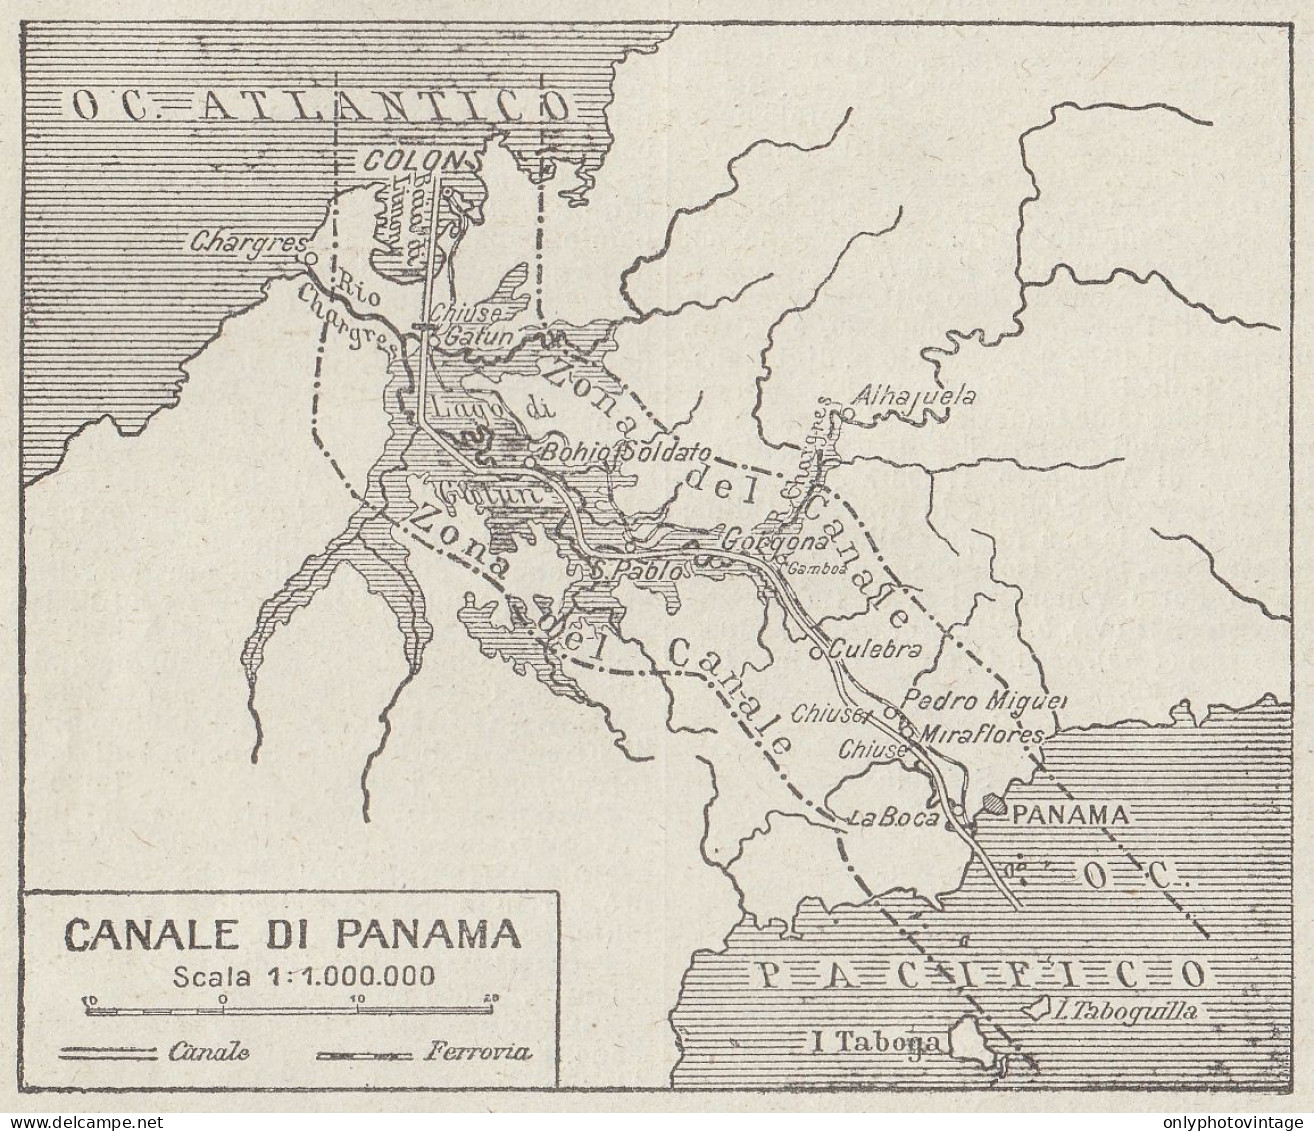 Canale Di Panama - Carta Geografica D'epoca - 1936 Vintage Map - Geographical Maps